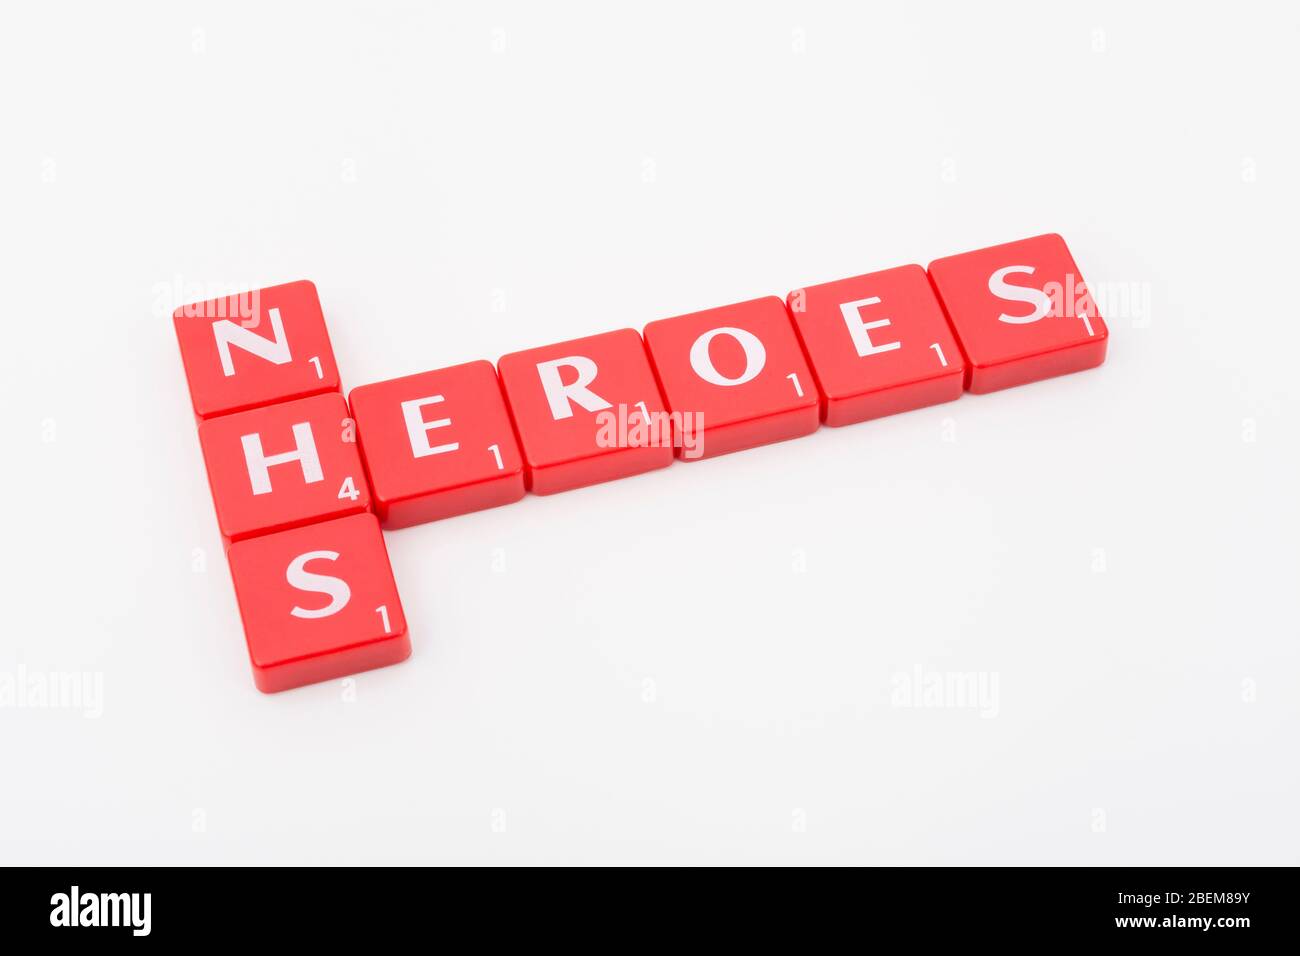 NHS Heroes letters tiles on off-white b/g. For NHS in CV19 Covid 19 pandemic, NHS staff, NHS prescriptions, UK National Health Service, medicine in UK Stock Photo